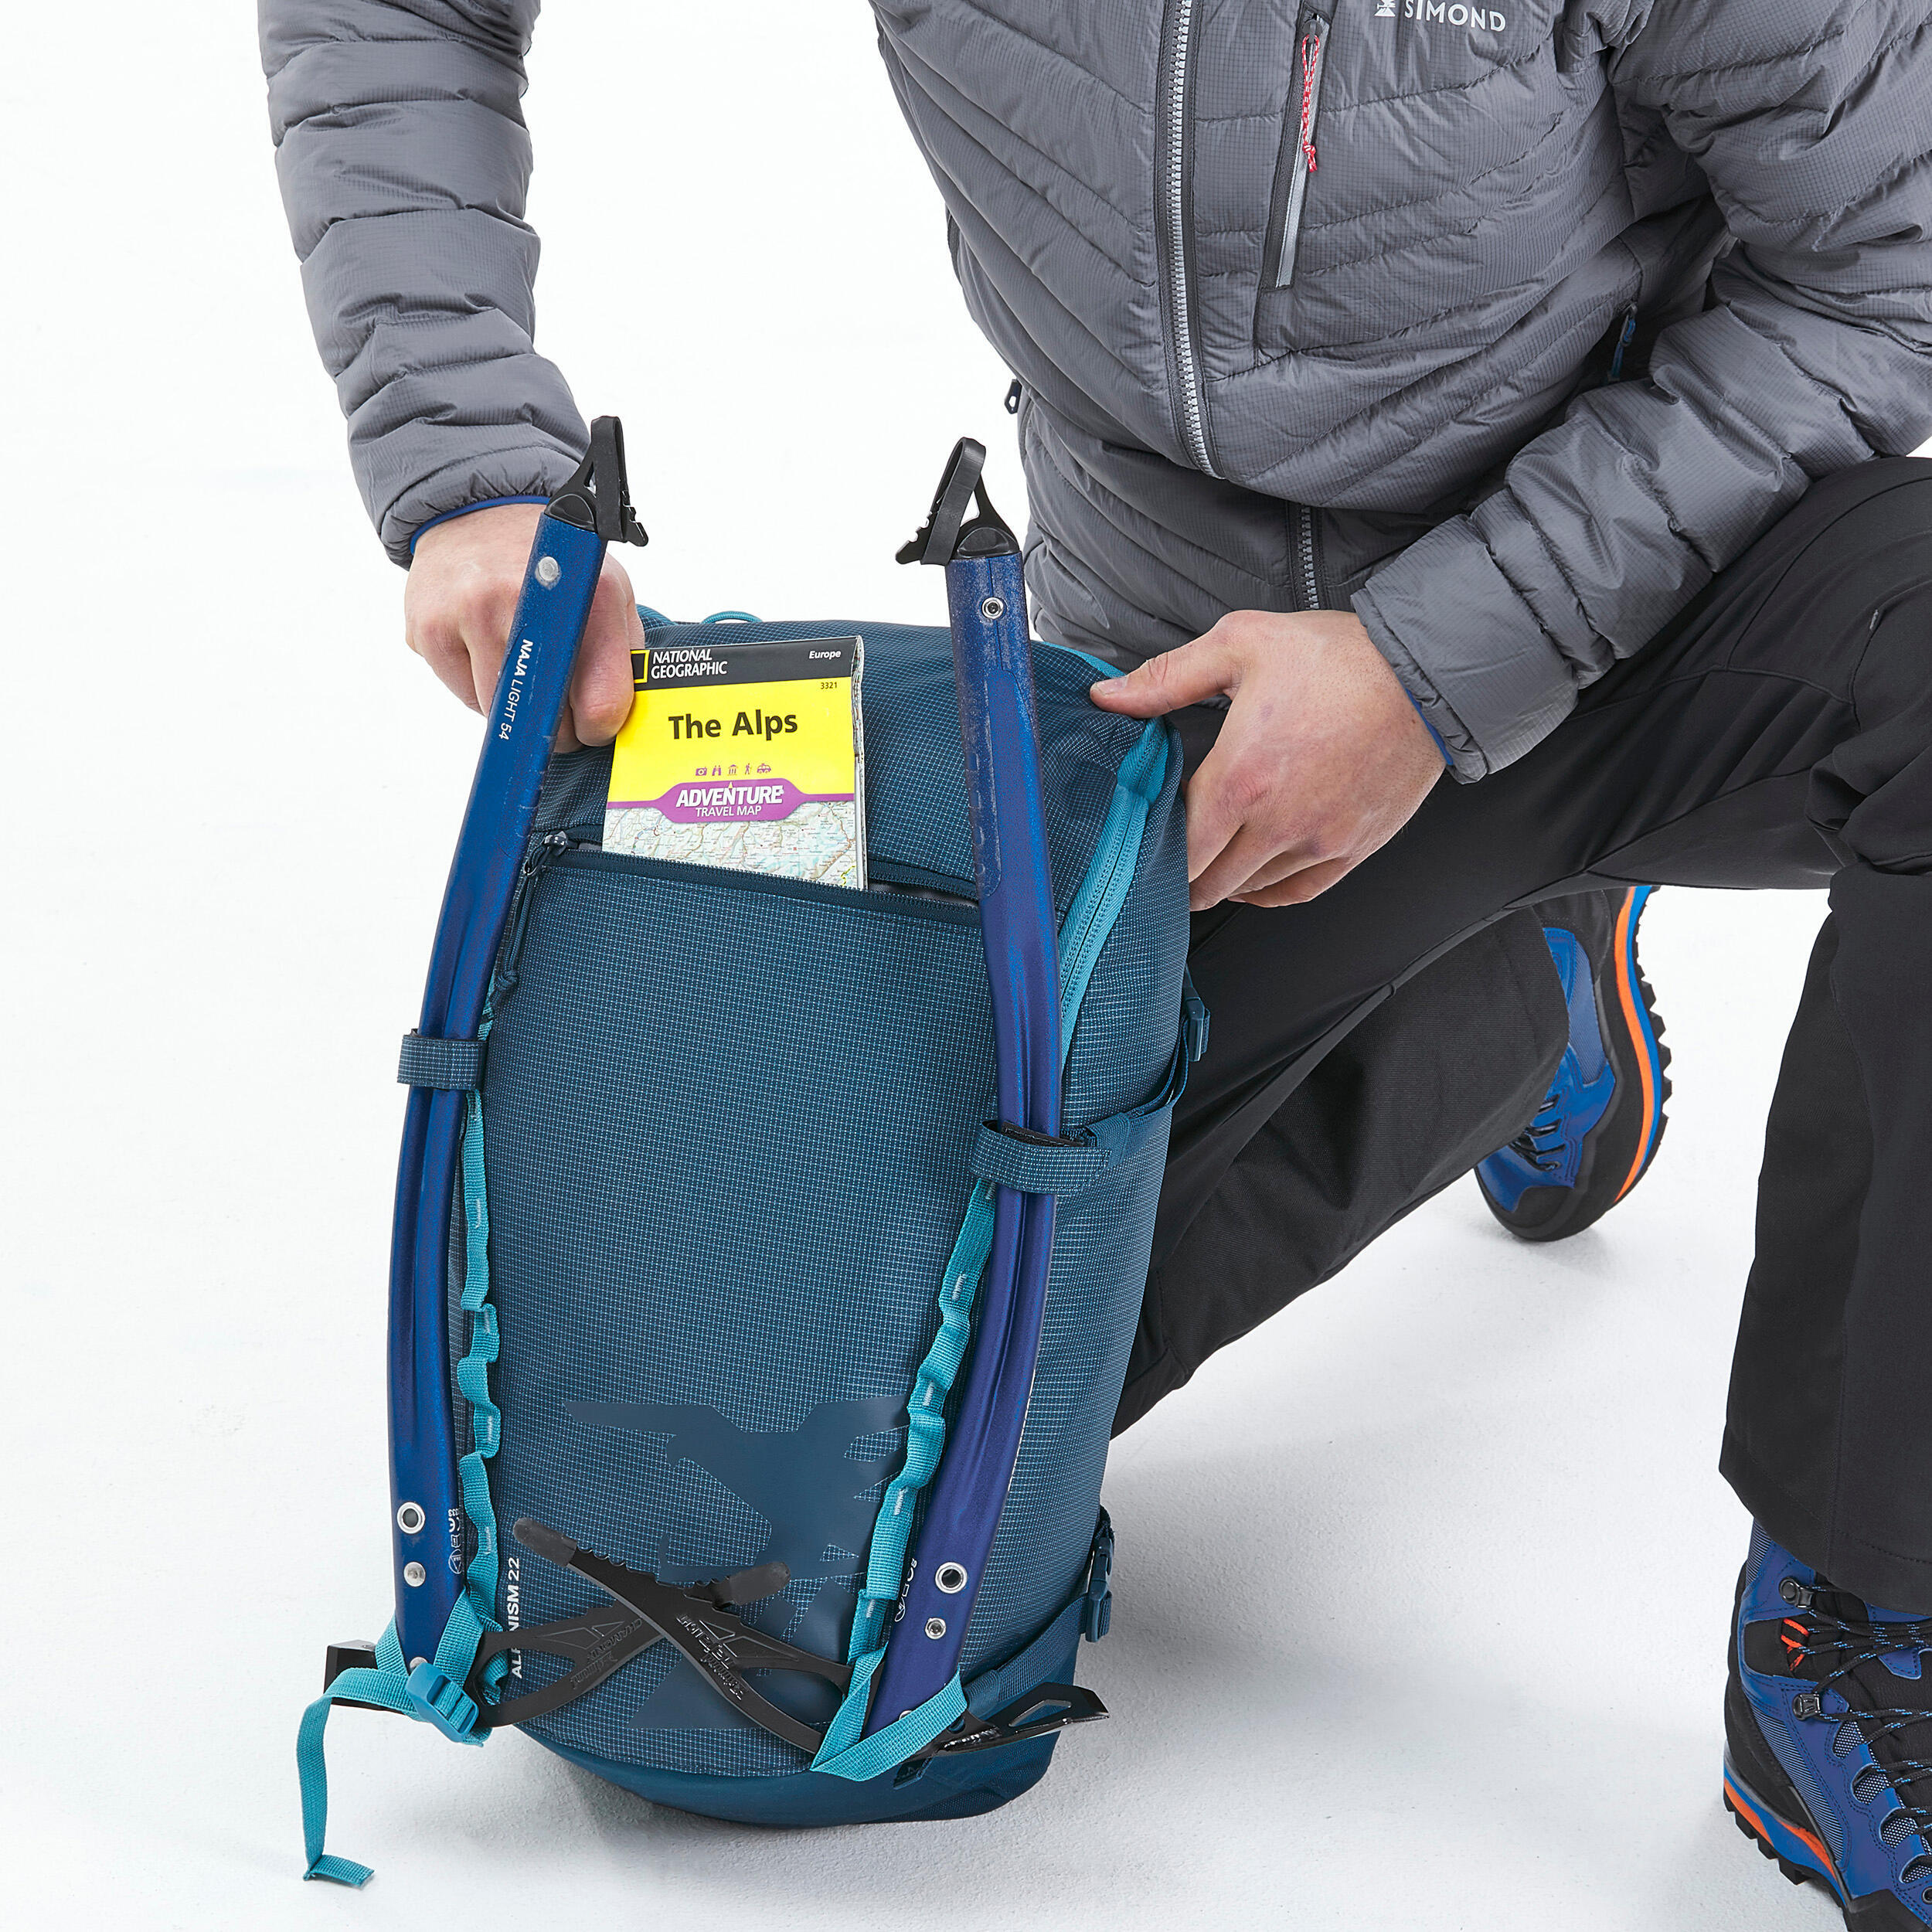 Mountaineering backpack 22 litres - MOUNTAINEERING 22 - GREEN BLUE 6/12